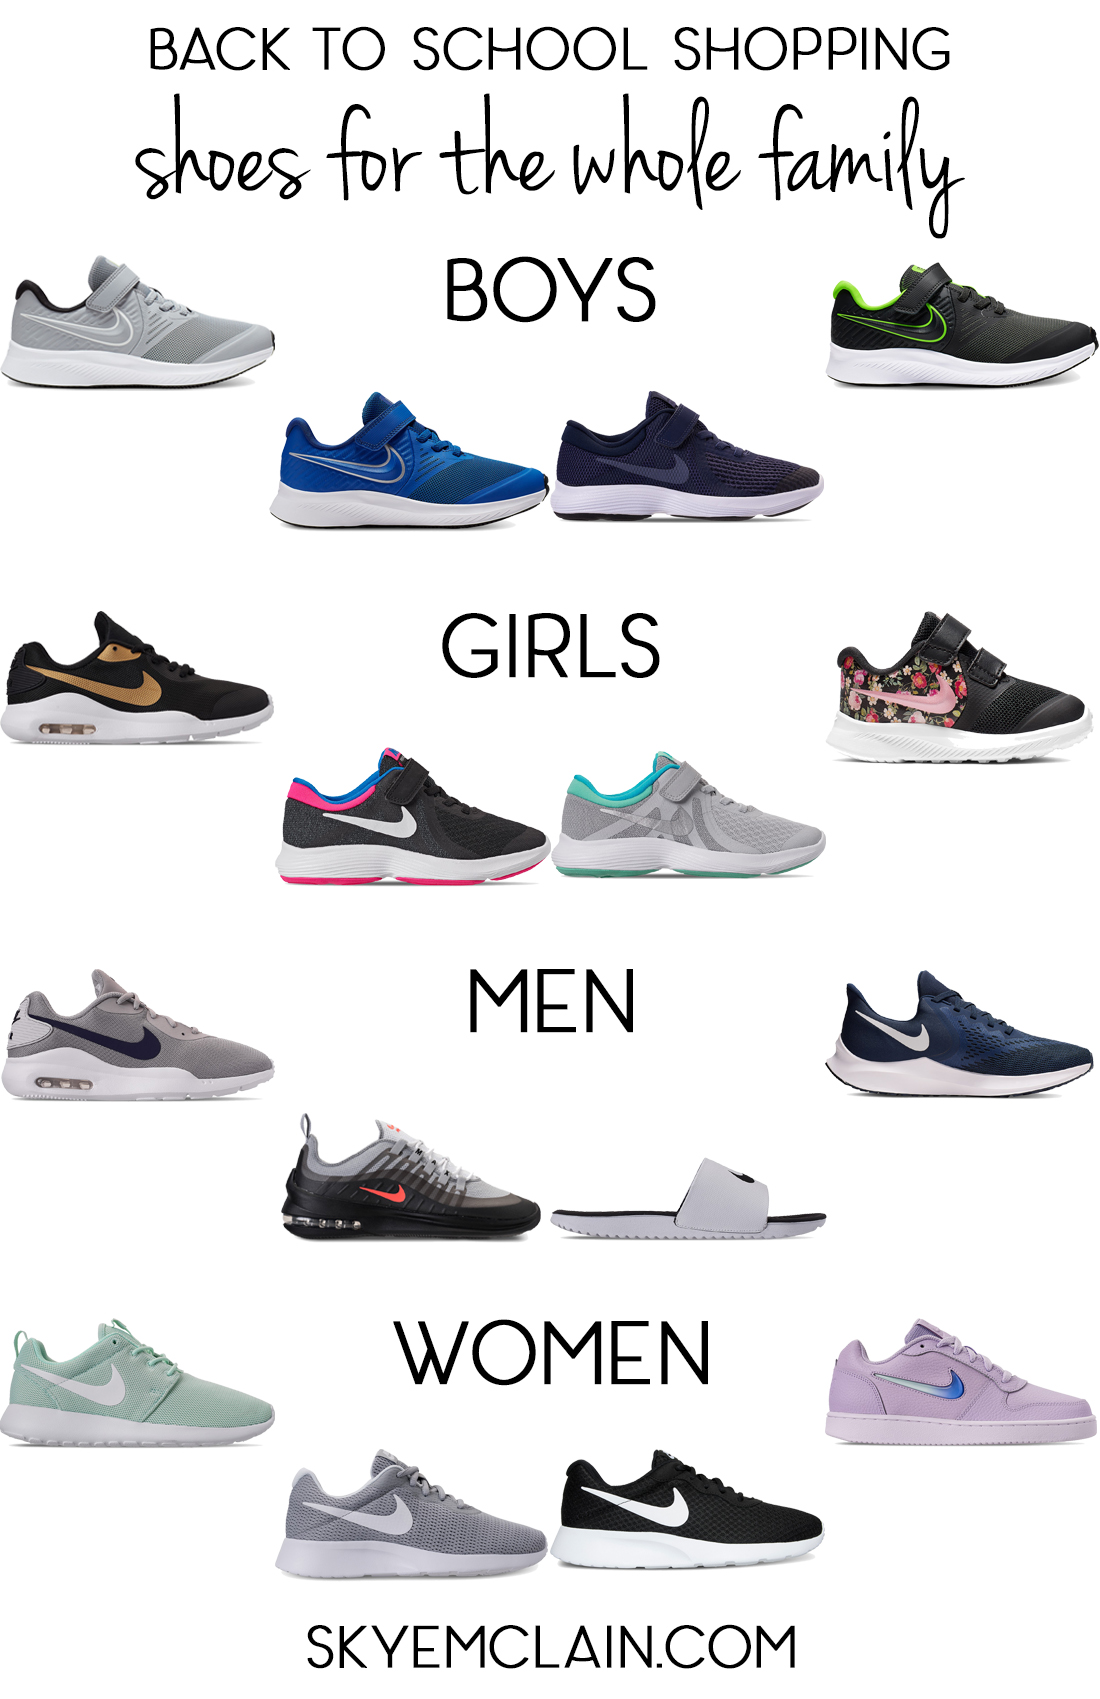 popular back to school shoes 2019